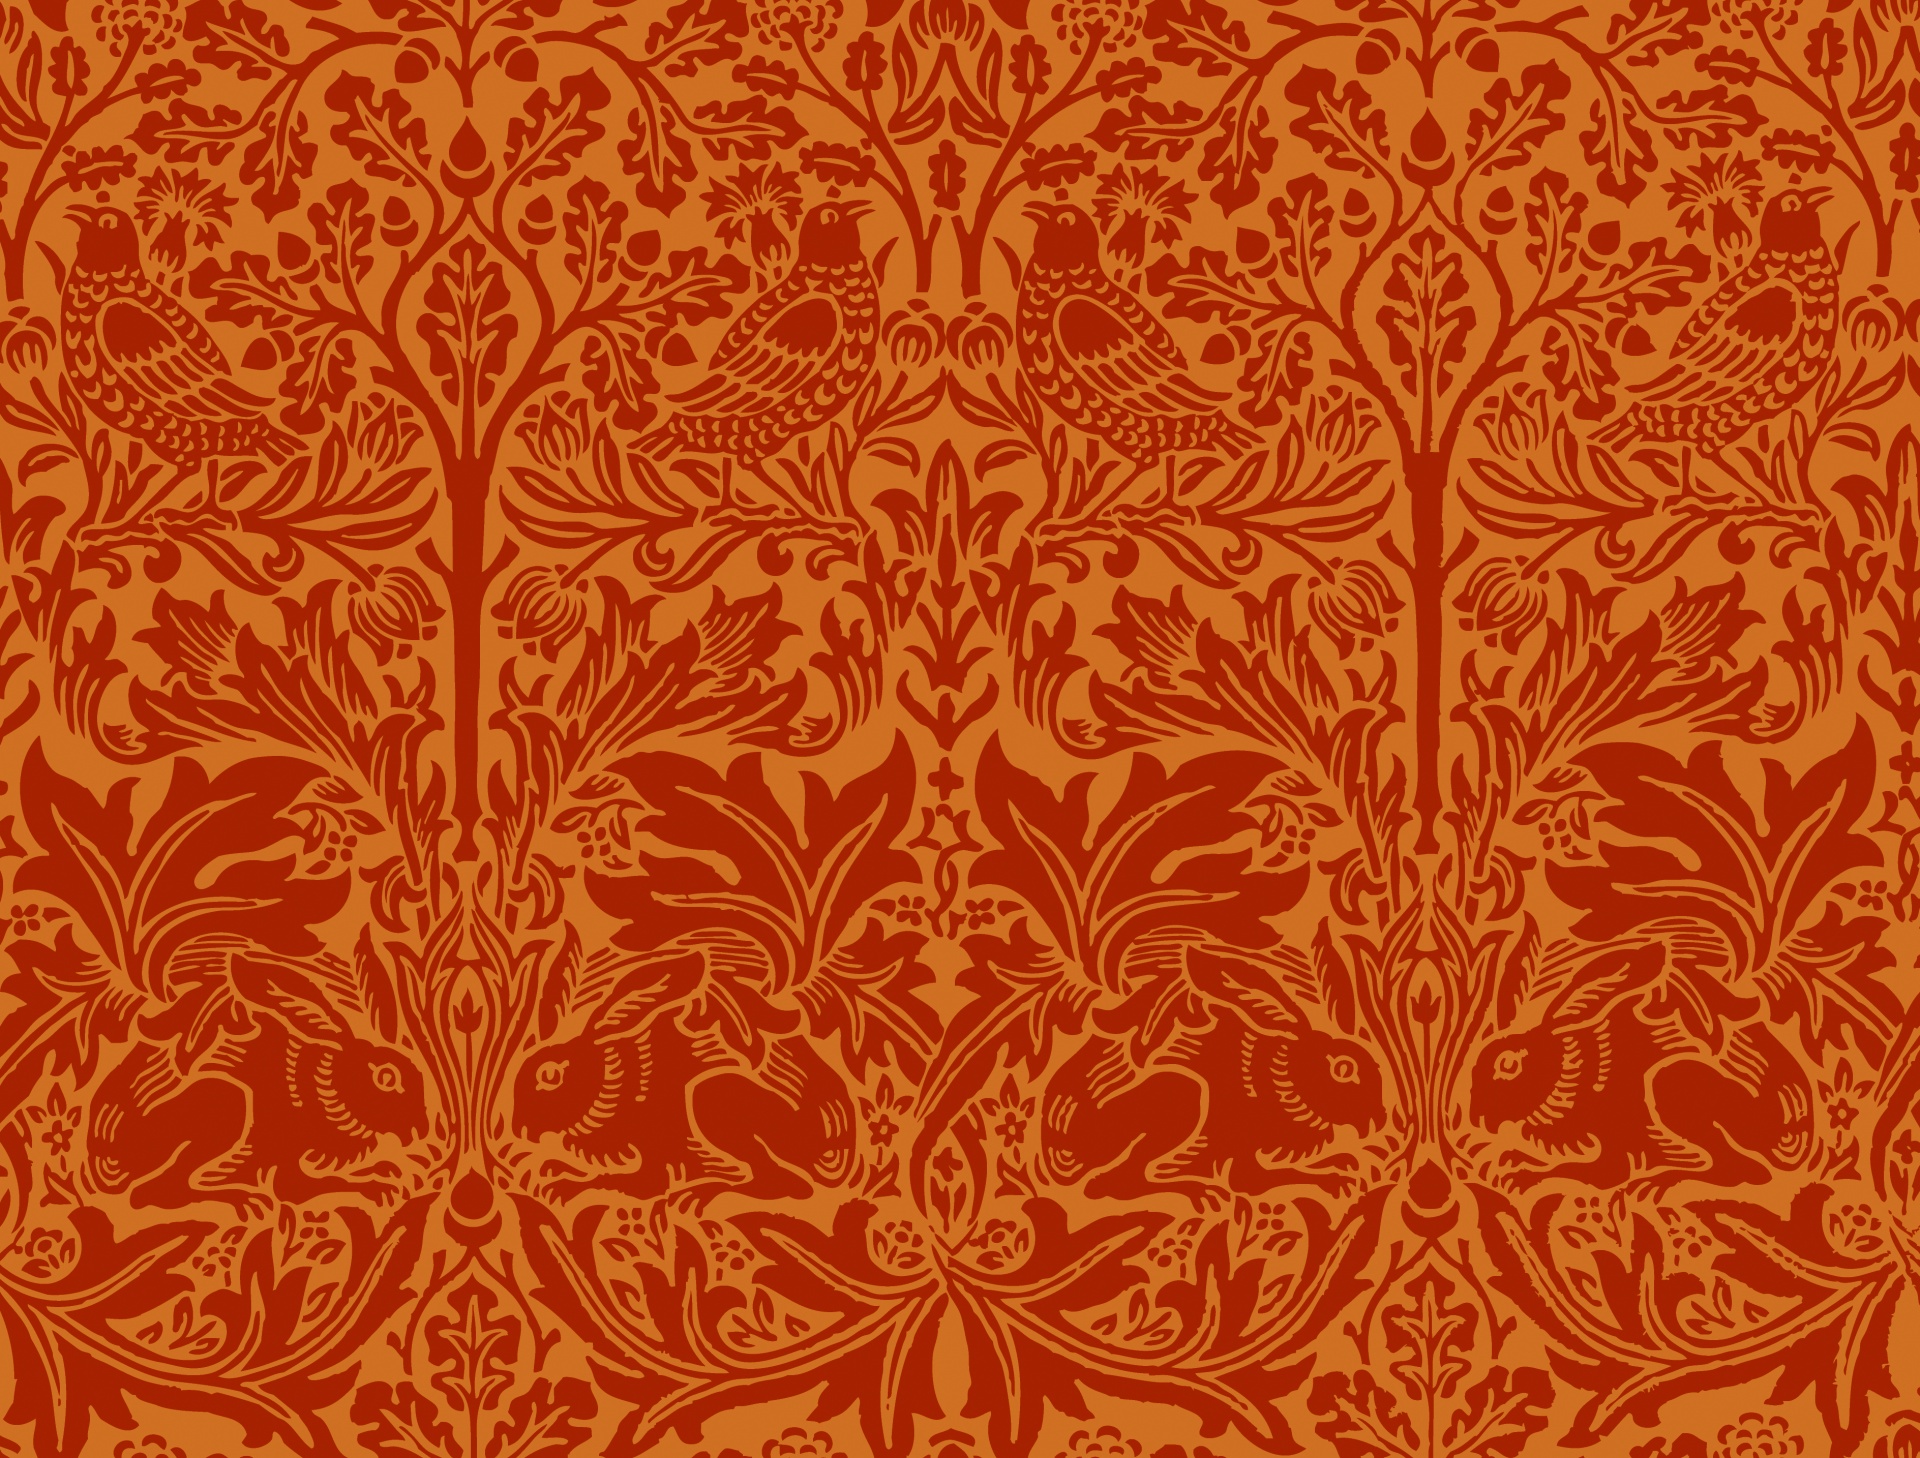 Vintage style wallpaper with birds, rabbits and leaves, modern illustration based on brer rabbit by William Morris